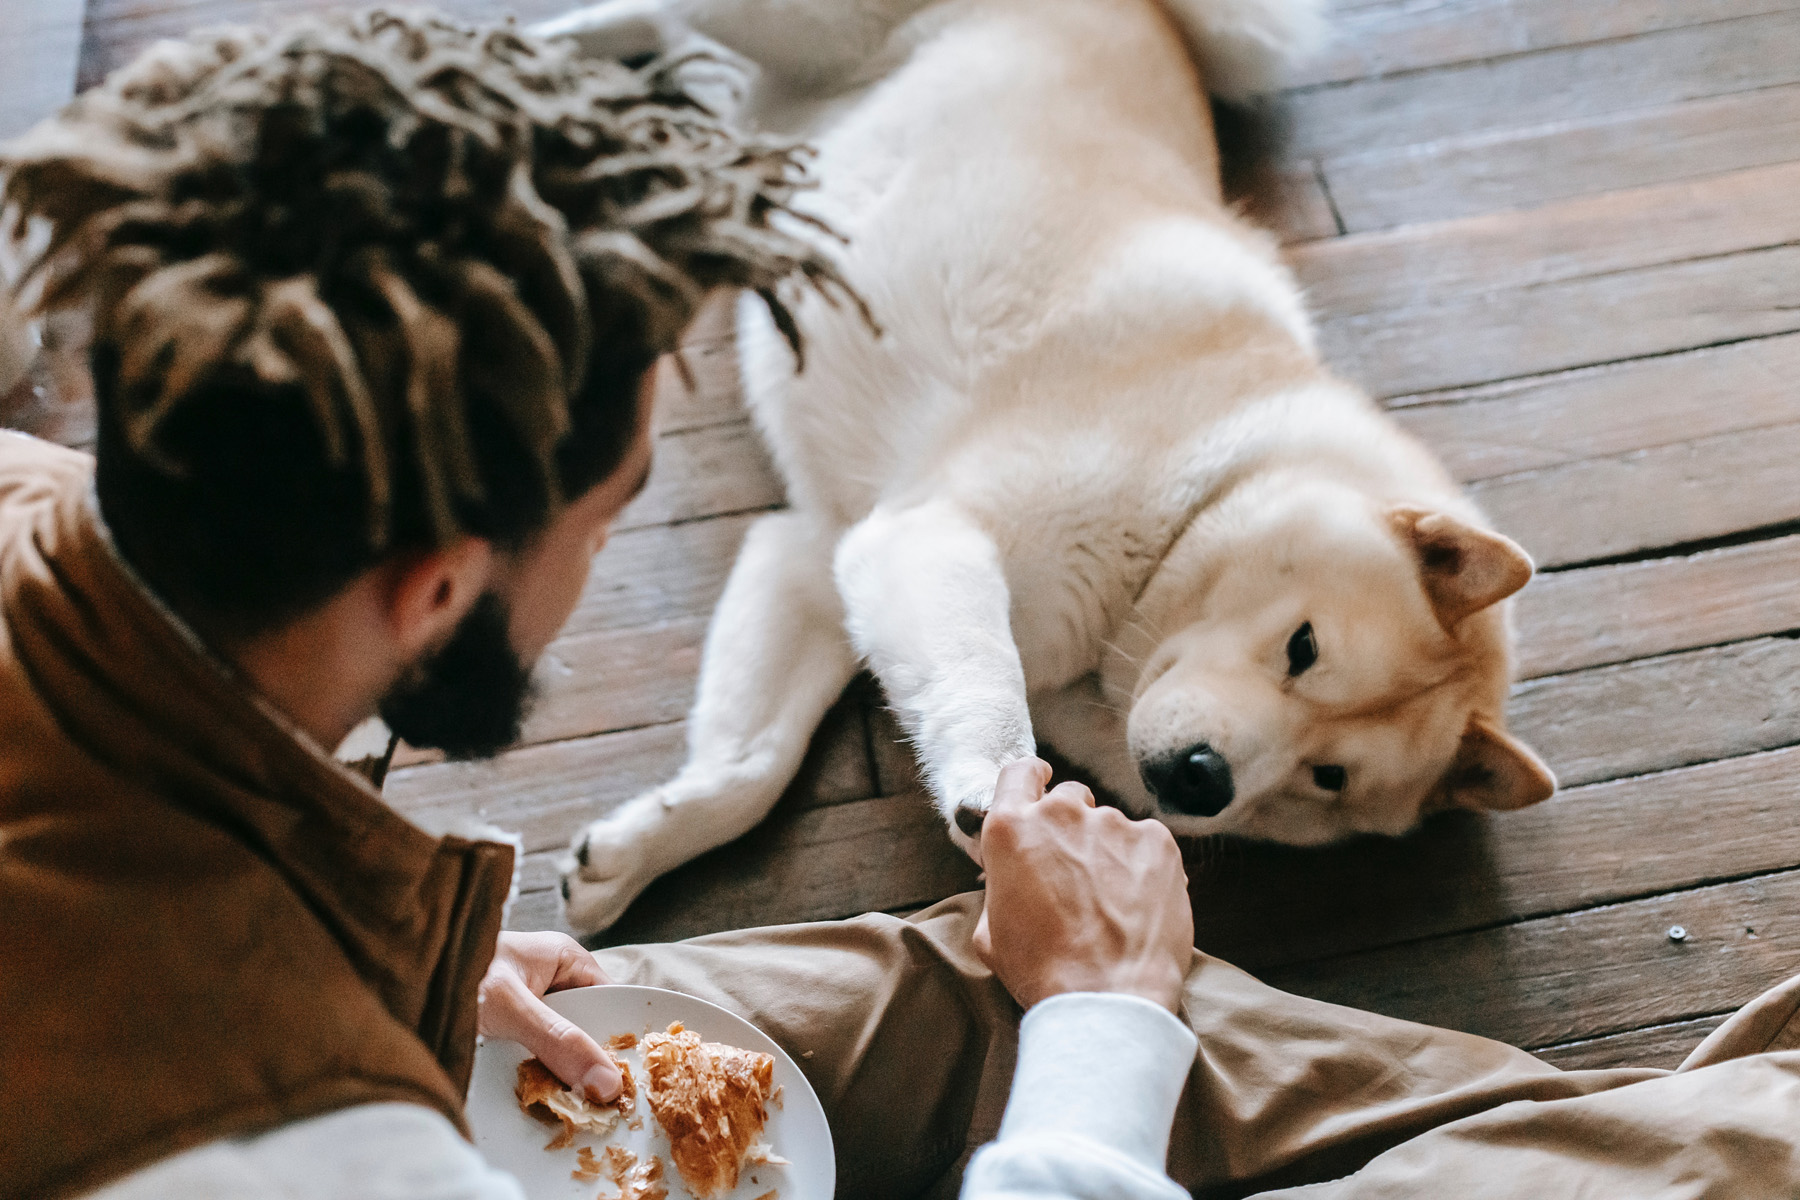 CBD may help your dog with anxiety and loss of appetite.